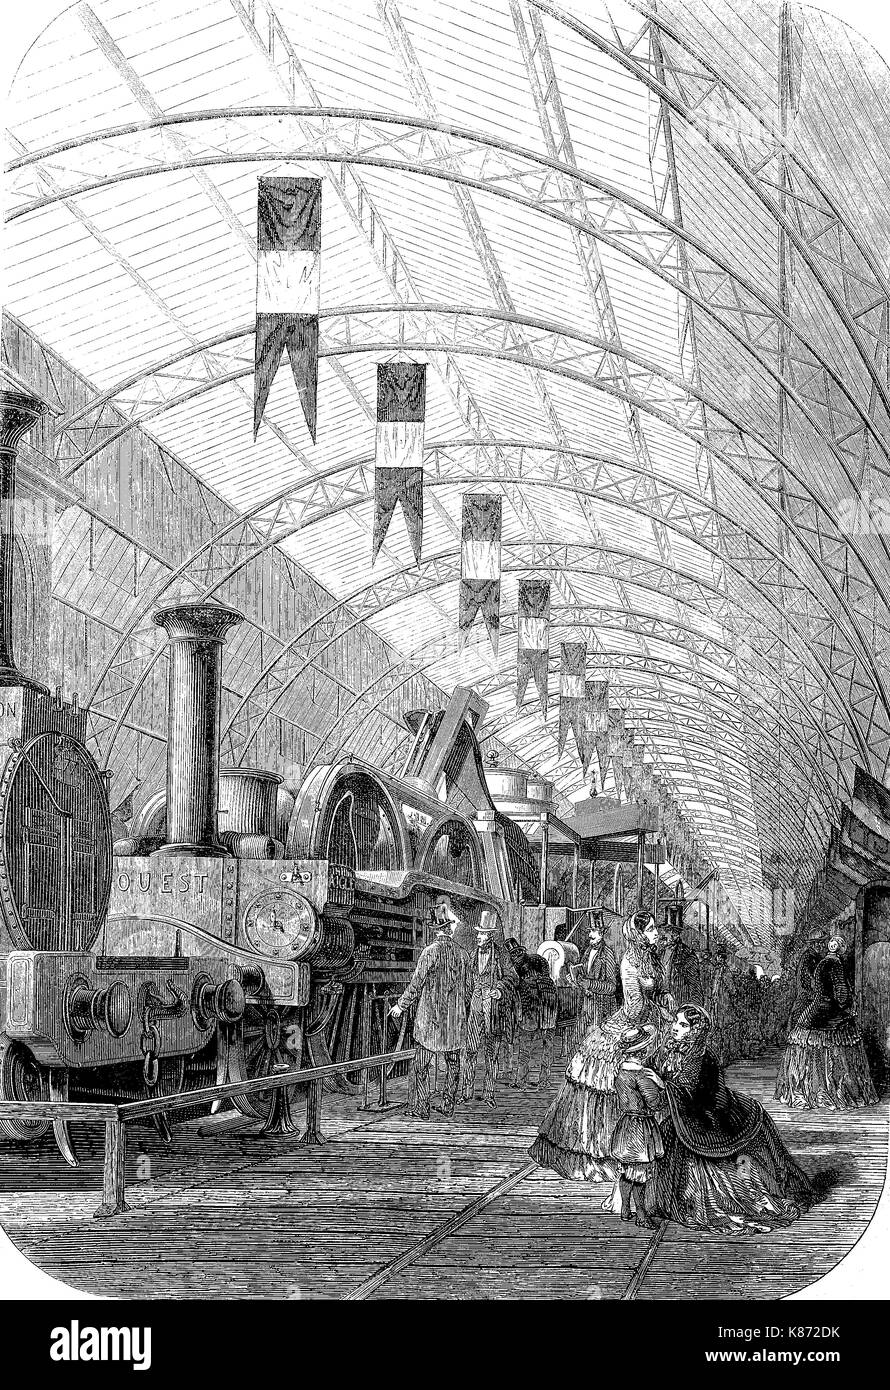 train in the The Annexe in France in a railway station, locomotive, Digital improved reproduction of an original woodprint from the 19th century Stock Photo